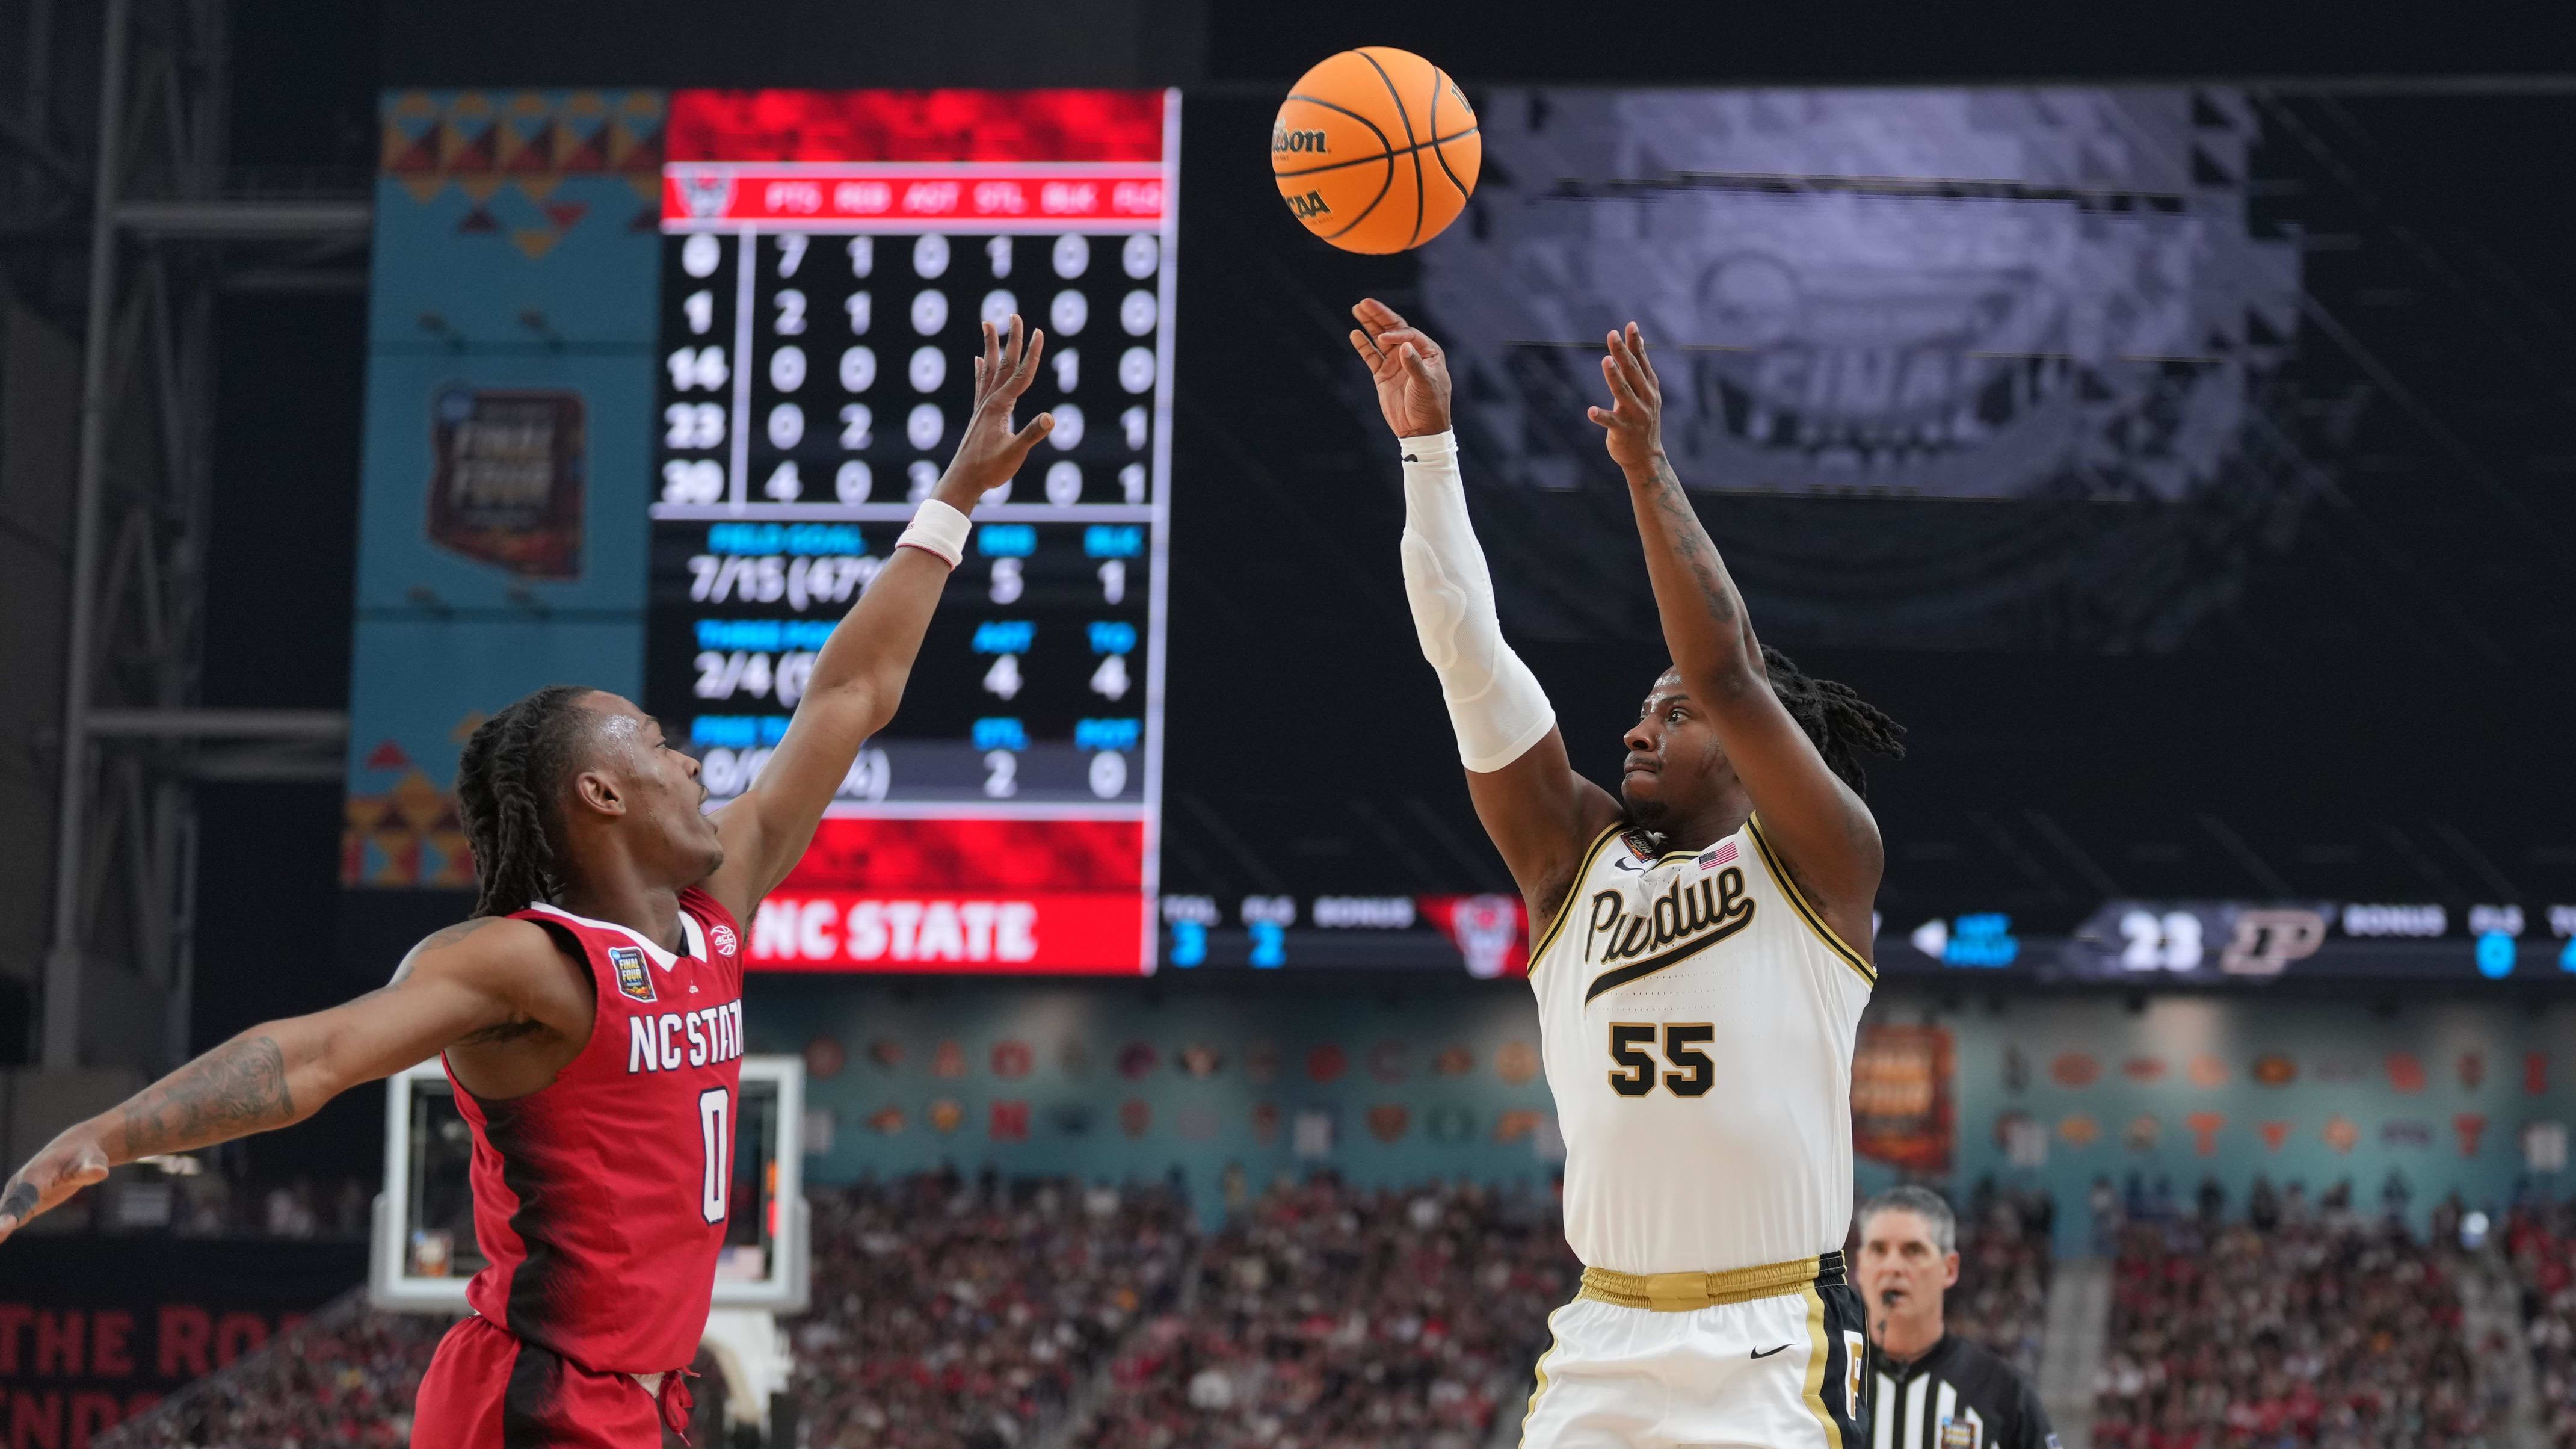 Jones’s four three-pointers were key for the Boilermakers in Saturday’s Final Four victory.